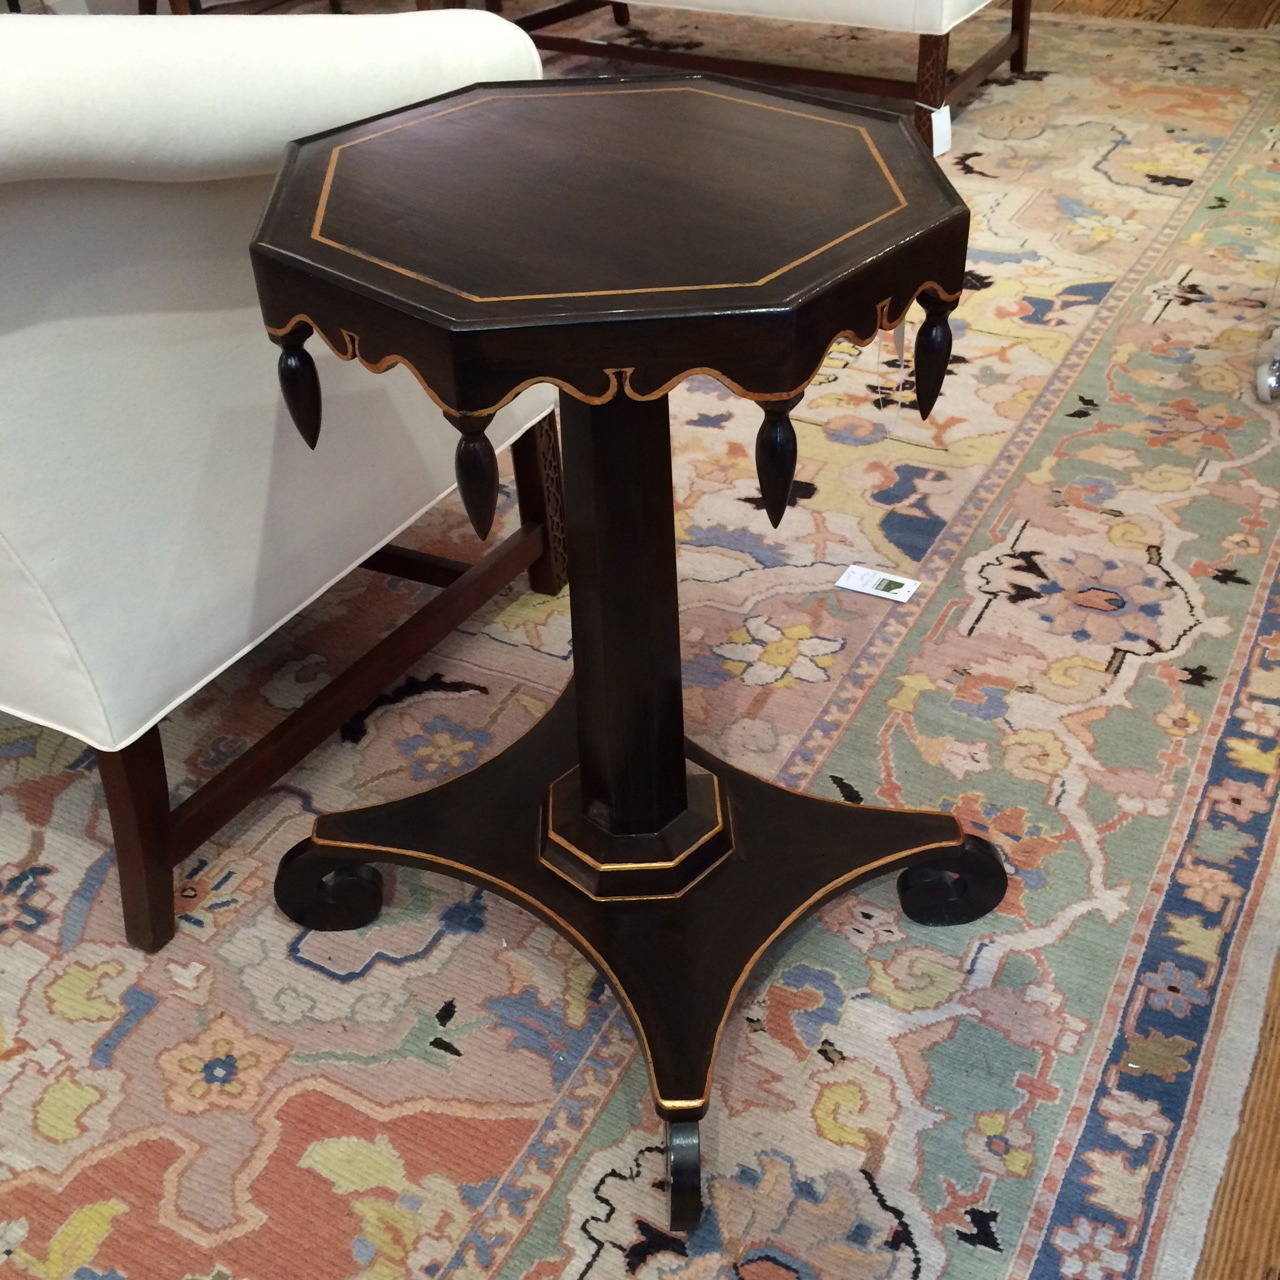 Very stylish black and gold wooden side table or drinks table, top is octagonal with scalloped decoration beneath and wooden tear drops. Base has curved feet and measures 28 x 28. Gold leaf detailing.